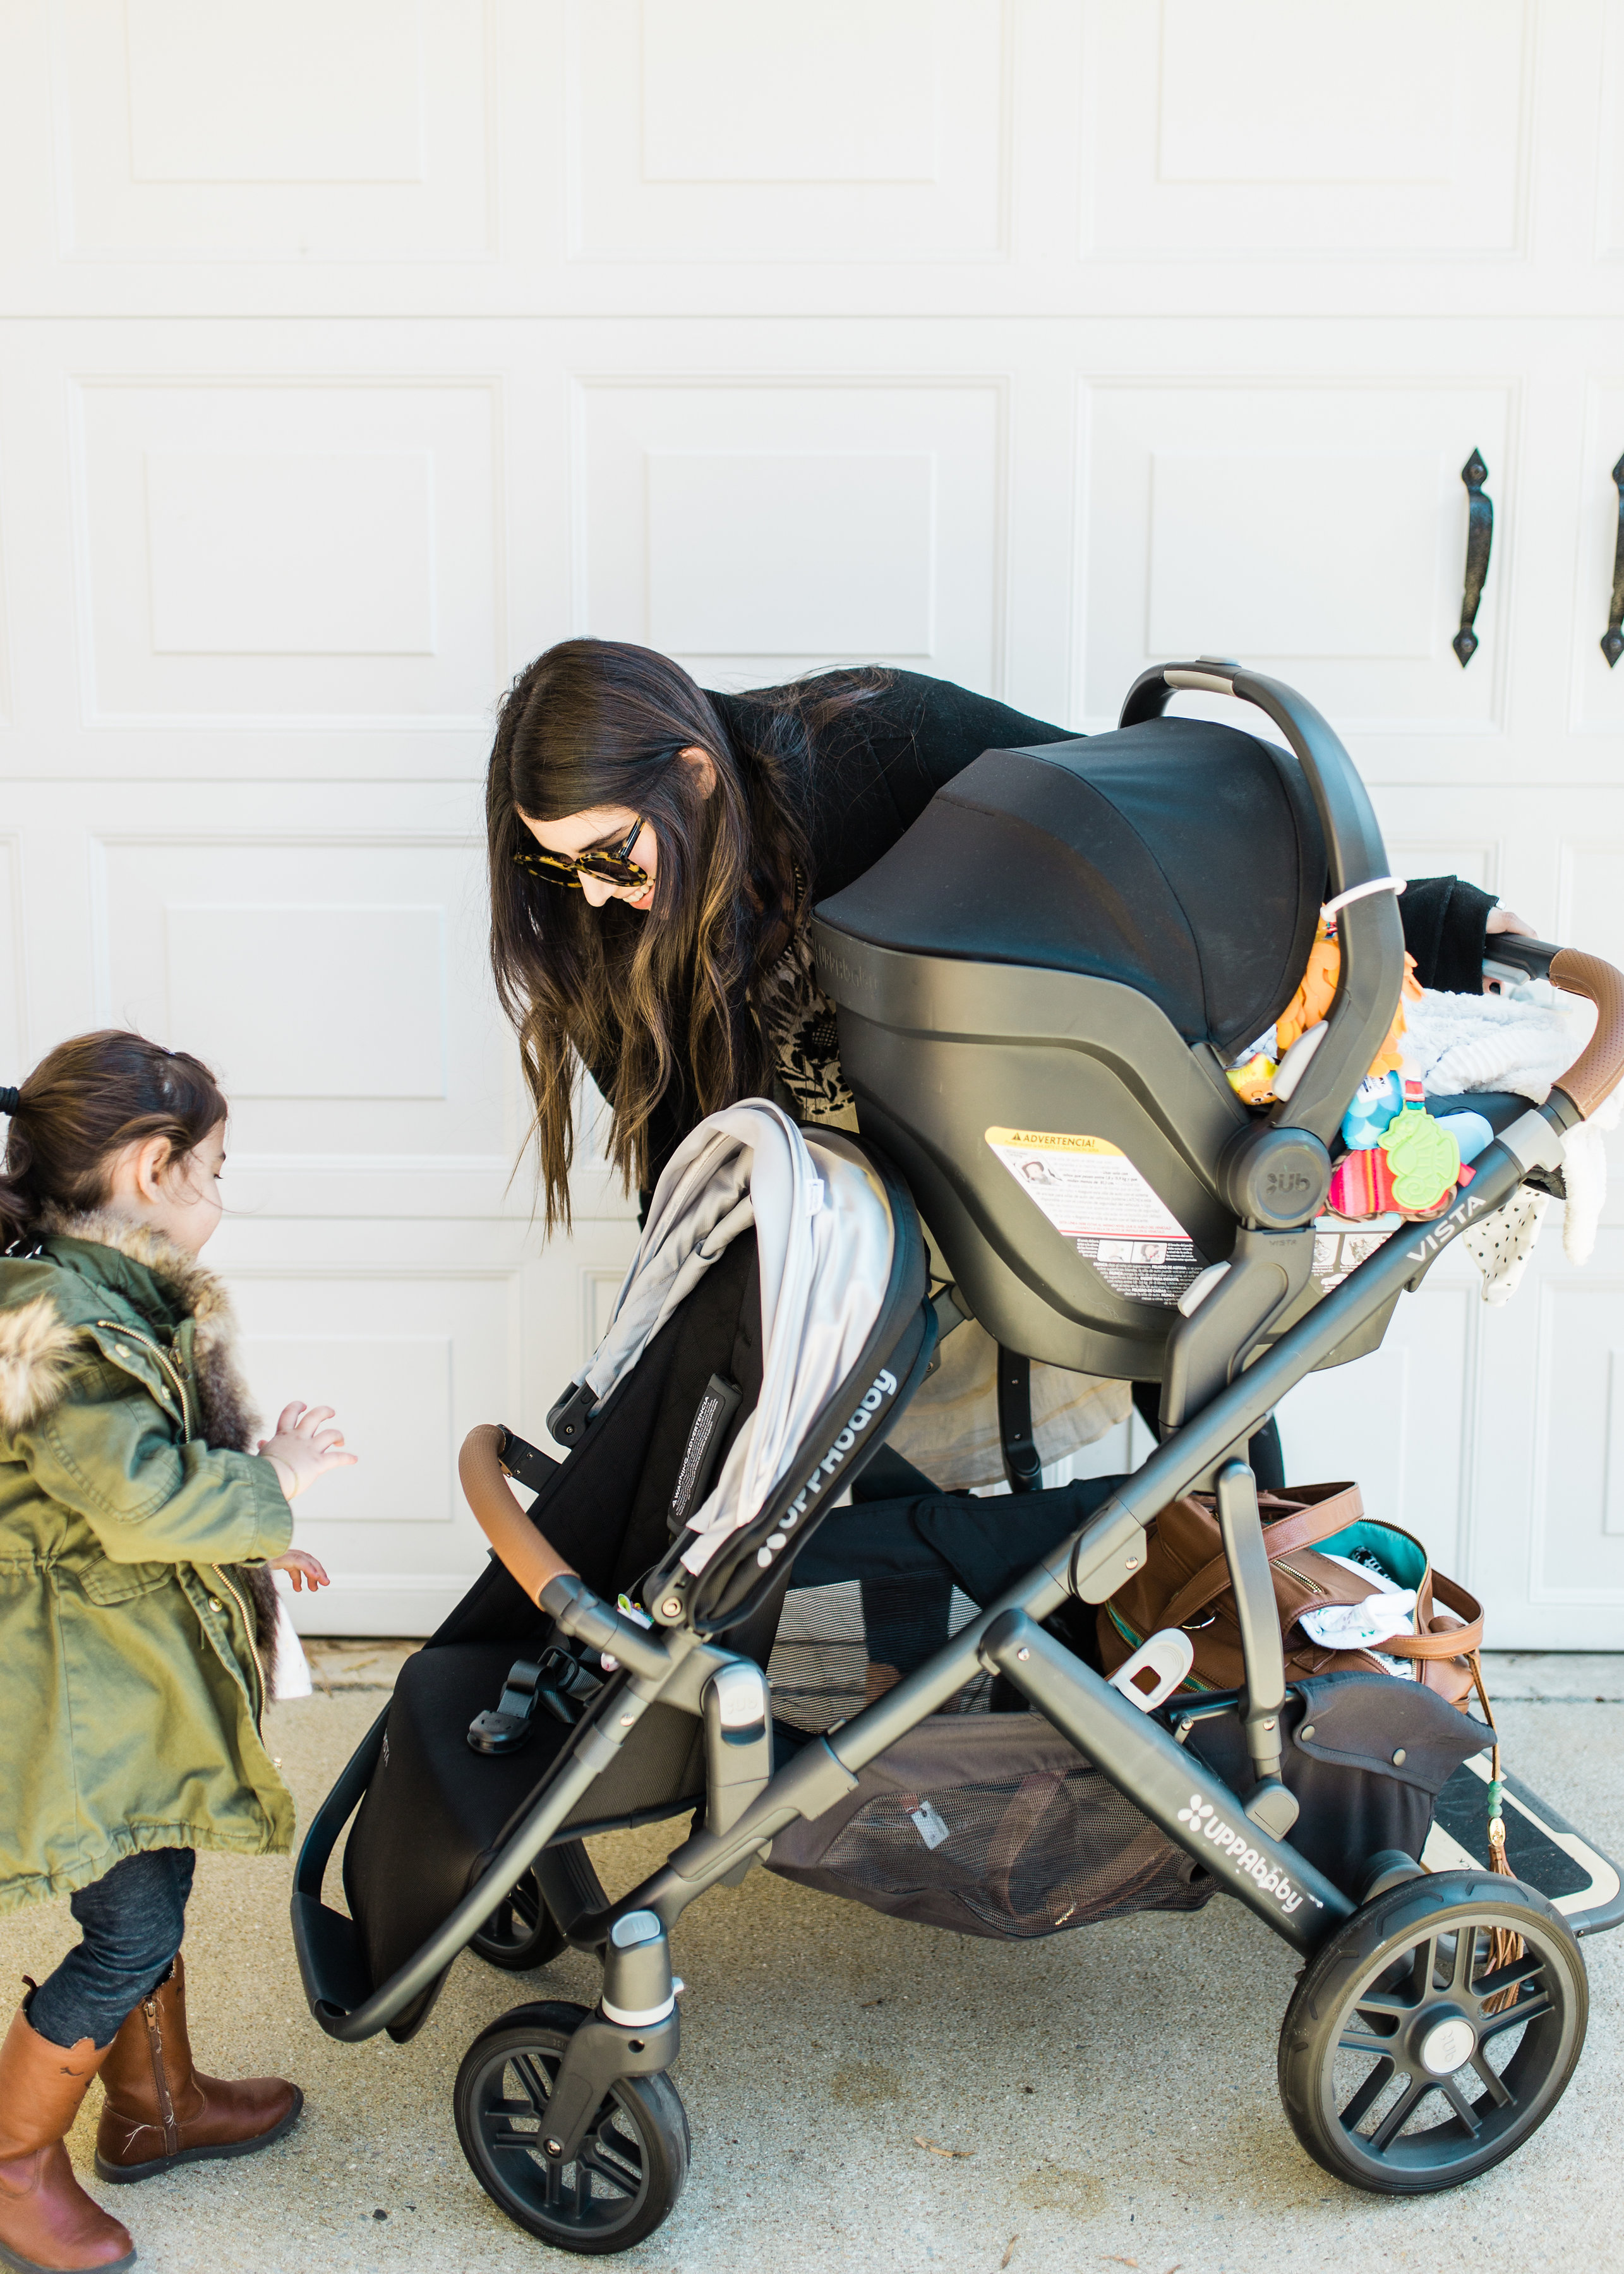 It's finally here! Our review of the UPPAbaby VISTA (and how we use the stroller for two kids under three); plus details about using the RumbleSeat, MESA Car Seat, and PiggyBack Ride-Along Board. Click through for the details. | glitterinc.com | @glitterinc - The Dream Stroller That Grows With Your Family: UPPAbaby VISTA by popular North Carolina mom blogger Glitter, Inc.